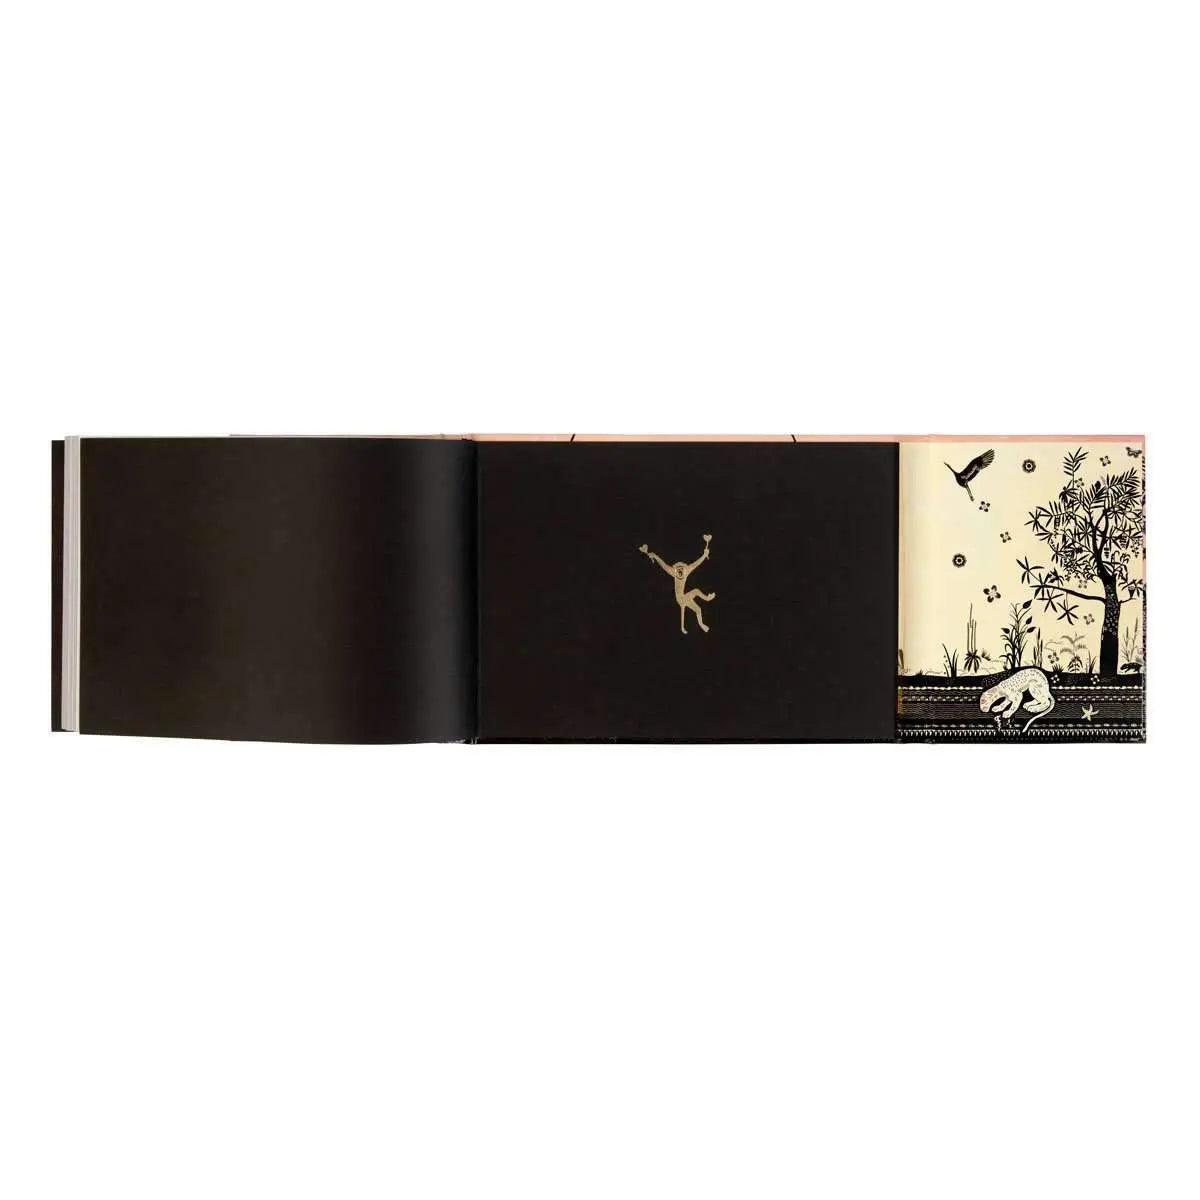 Black pages of Hachette Christian Lacroix Bois Paradis Paseo Guest Book with a gold printed design on the right page